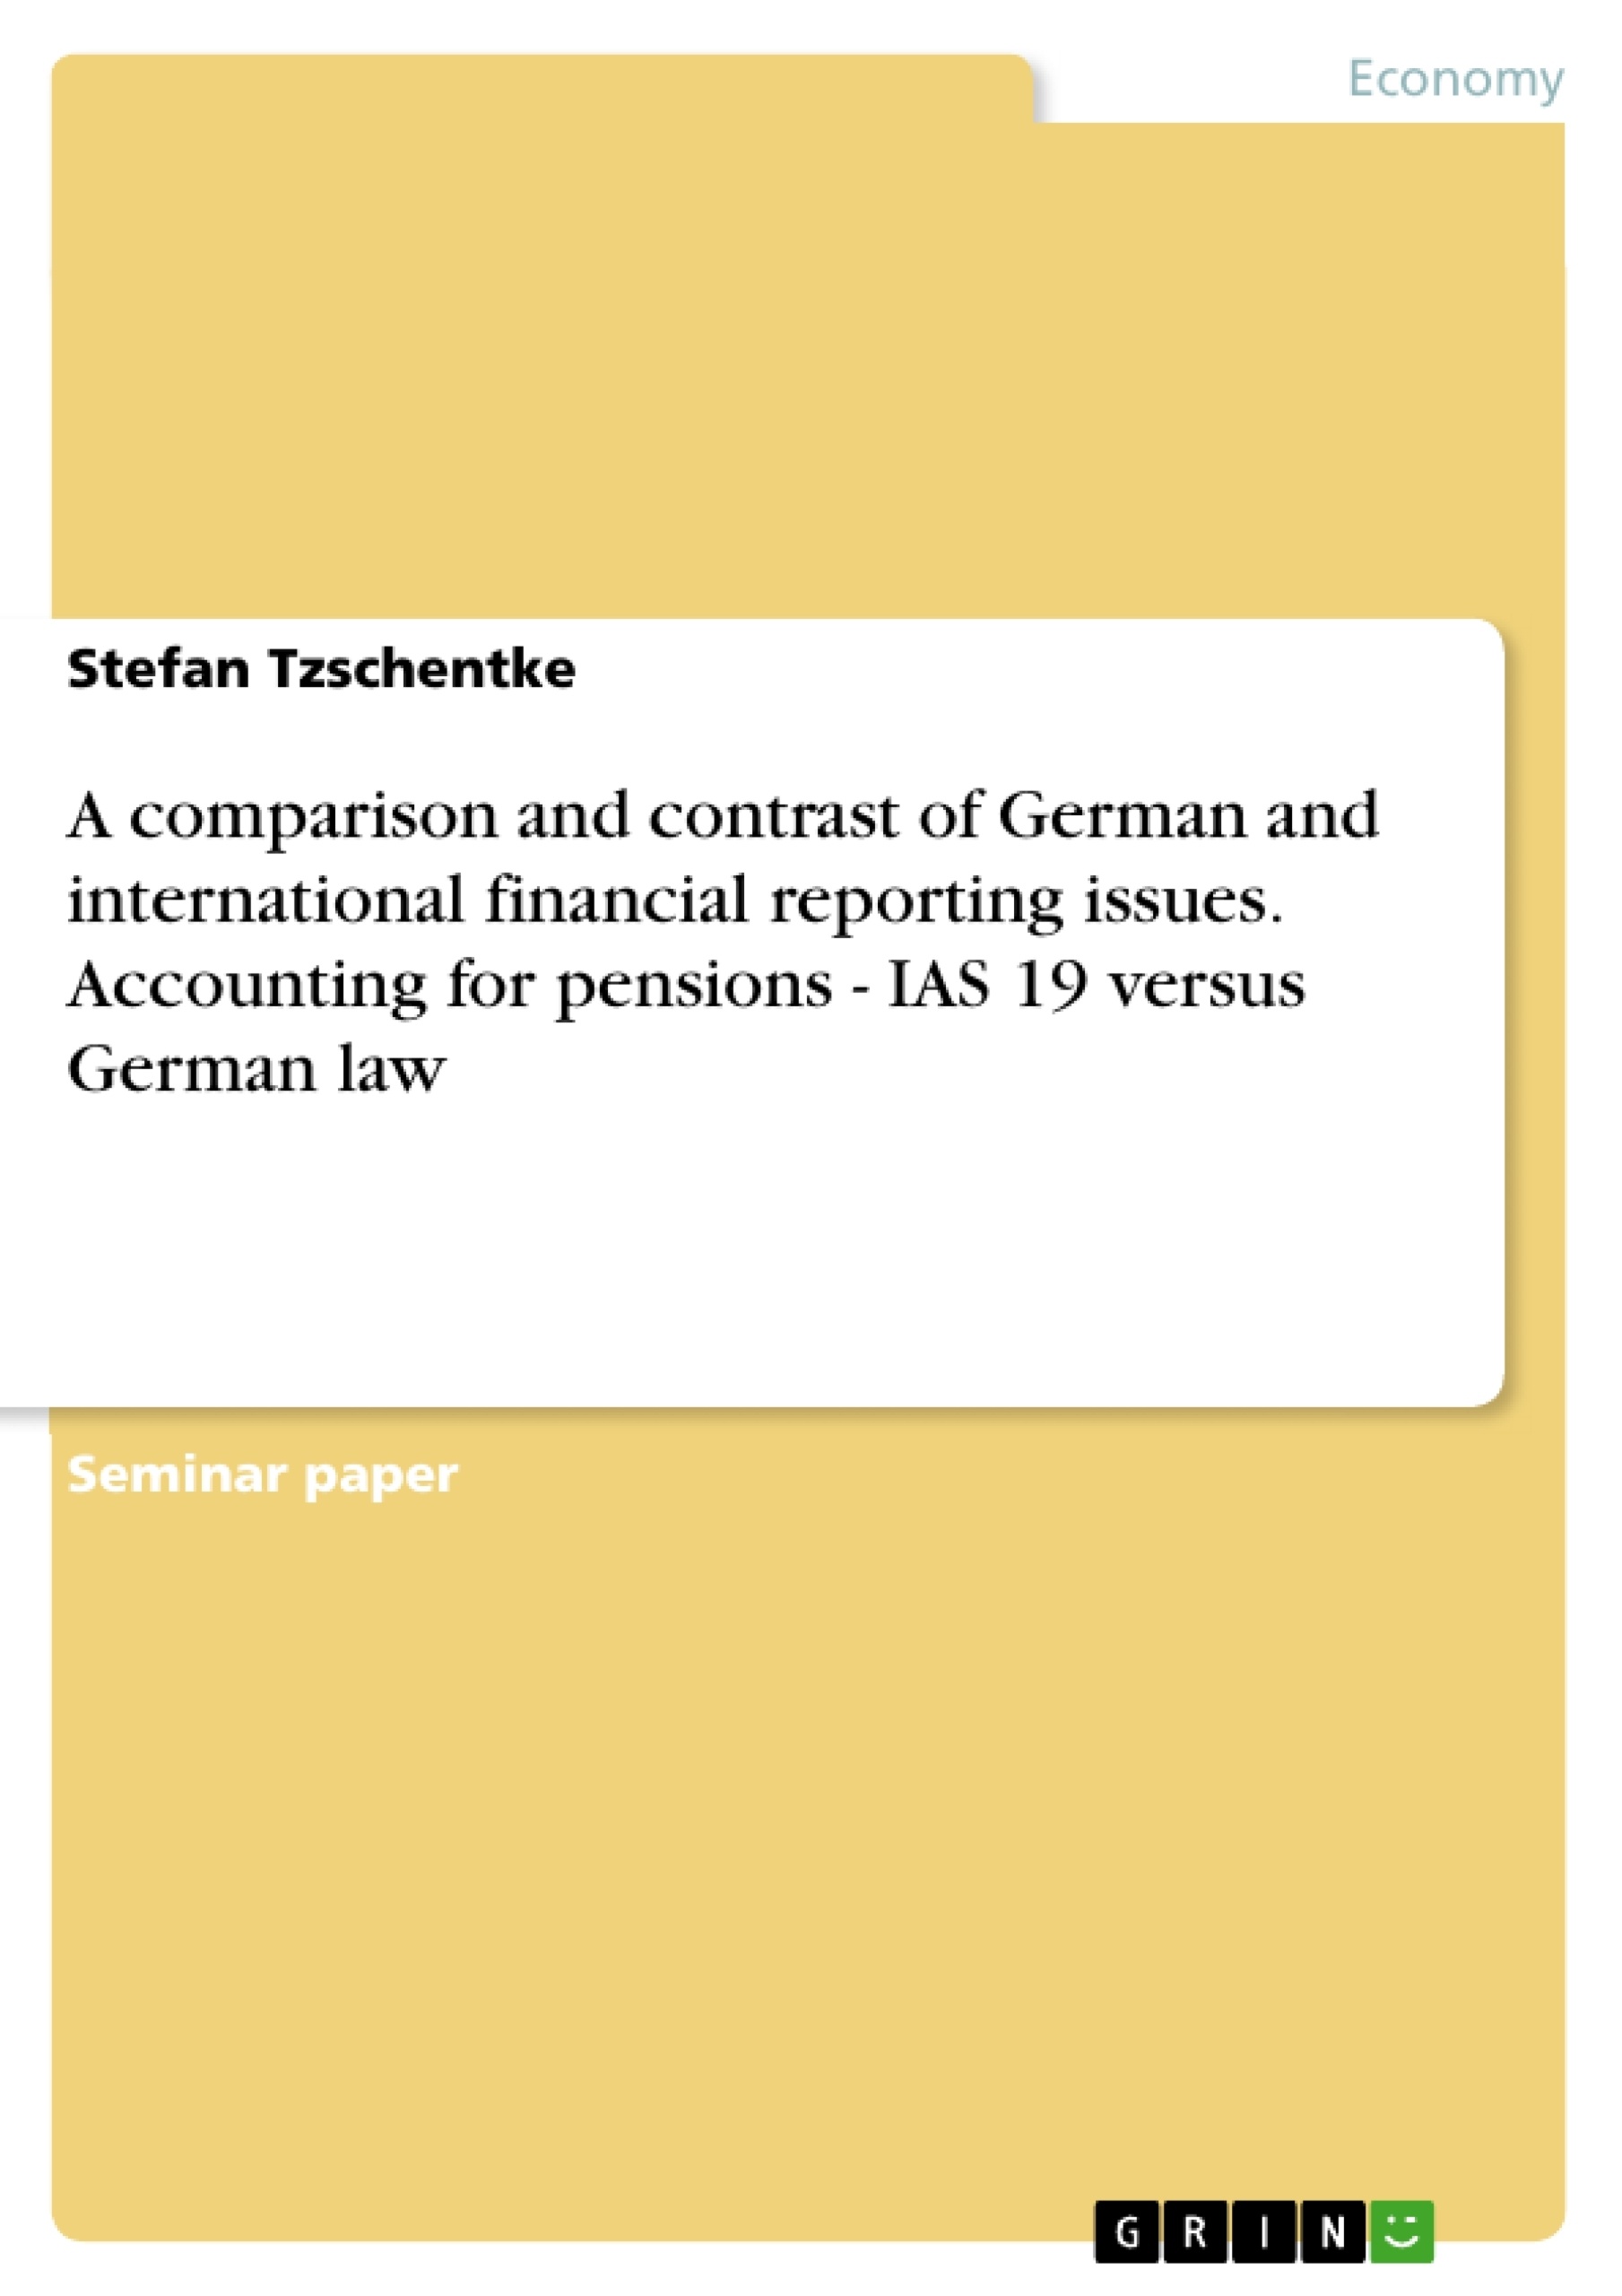 Titel: A comparison and contrast of German and international financial reporting issues. Accounting for pensions - IAS 19 versus German law 